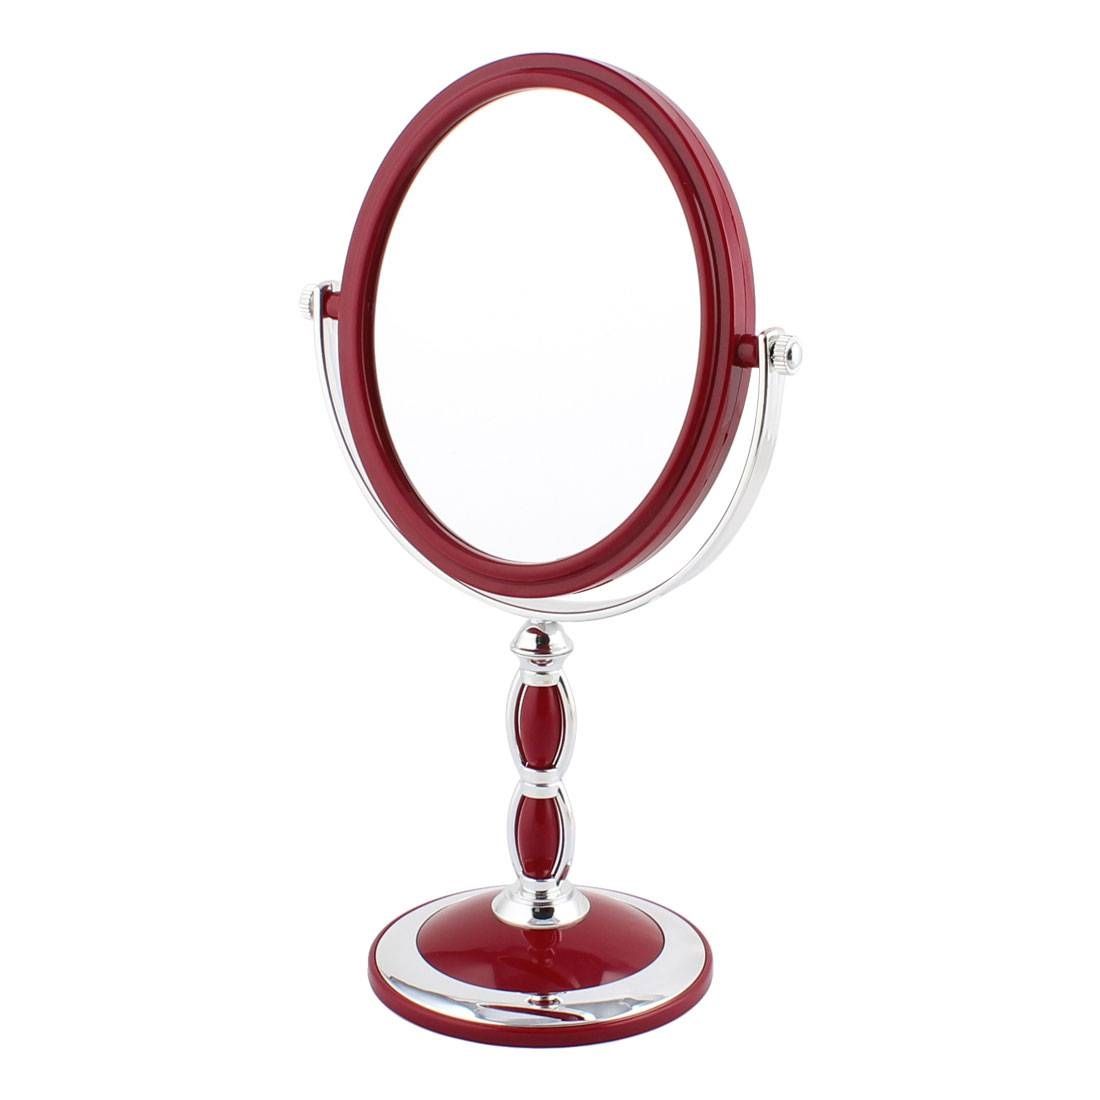 Compare Prices On Vintage Standing Mirrors  Online Shopping/buy With Regard To Vintage Standing Mirrors (View 13 of 15)